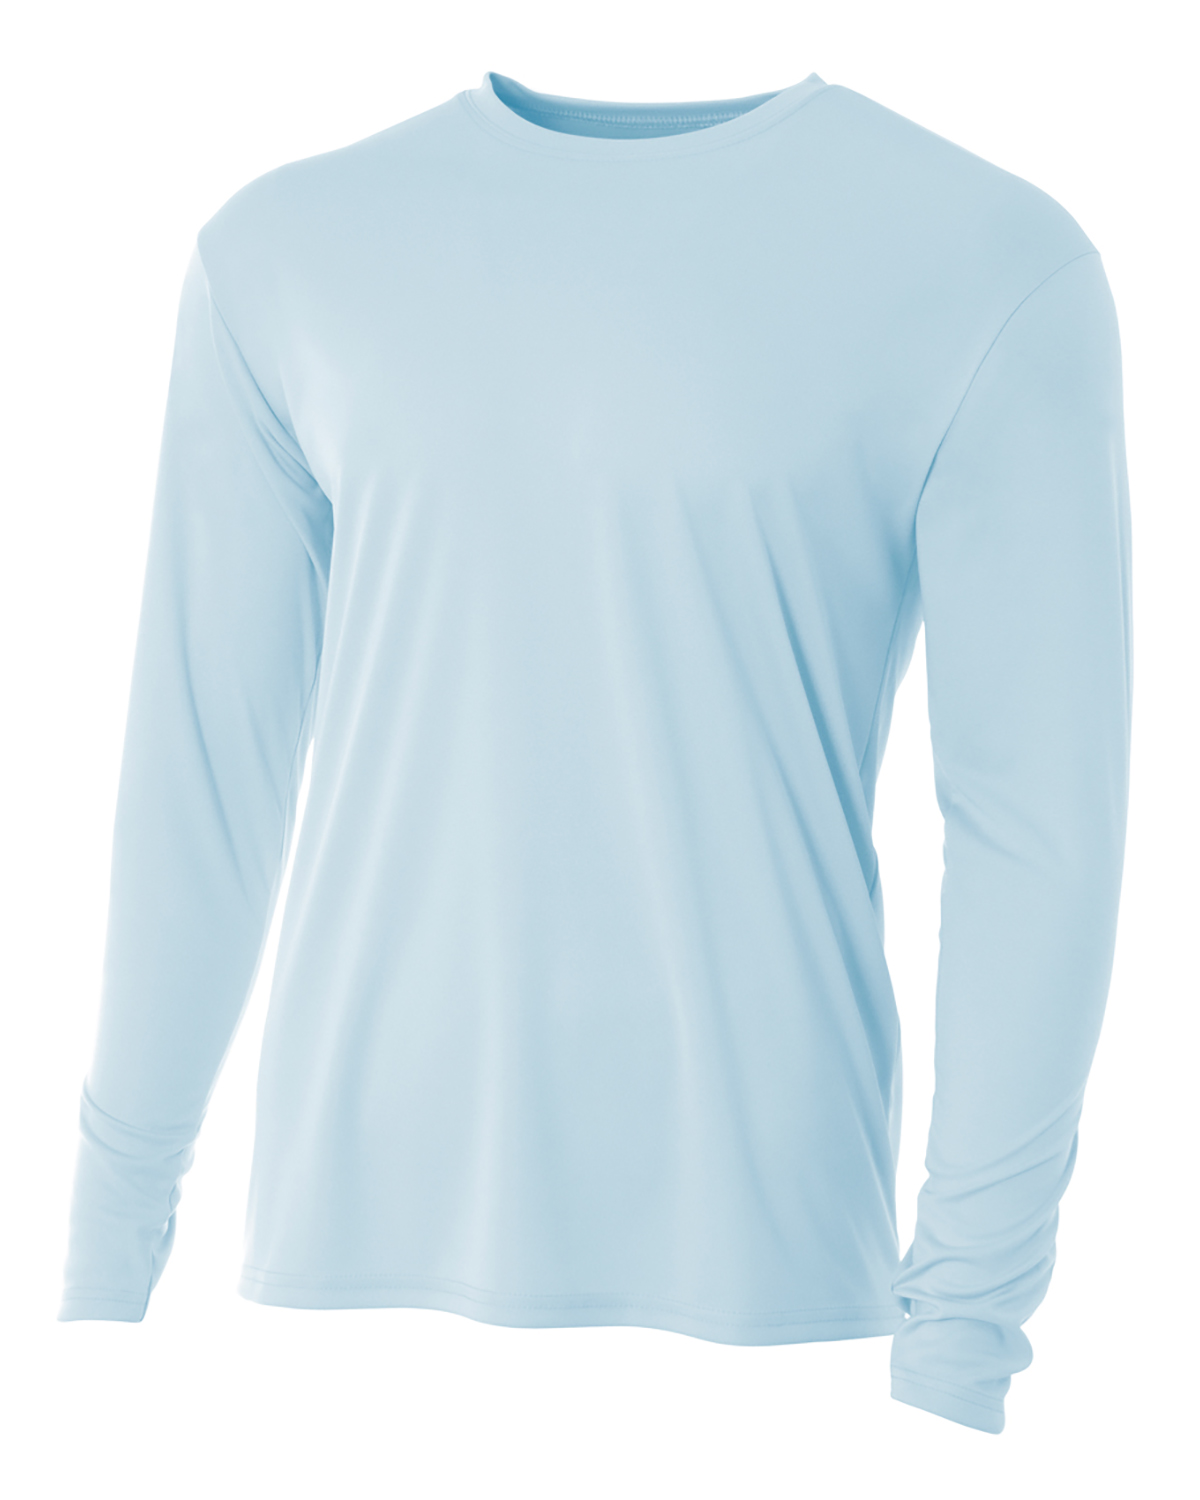 https://images.shirtspace.com/fullsize/mG%2F%2BmE7pJP9YAaUyDtHWKw%3D%3D/156254/2939-a4-n3165-men-s-cooling-performance-long-sleeve-t-shirt-front-pastel-blue.jpg